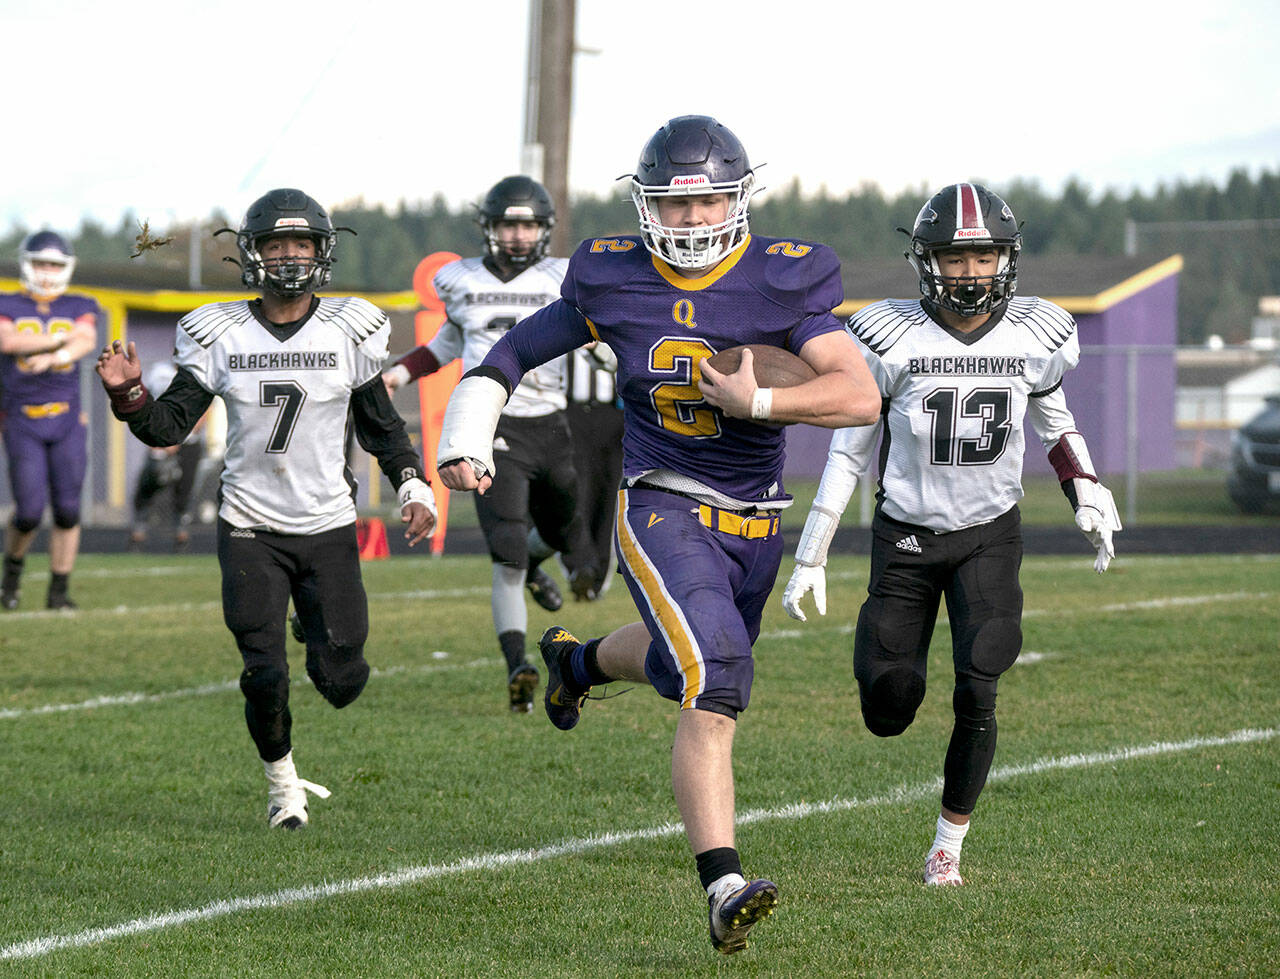 The Quilcene Rangers’ Bishop Budnek runs unhindered to the goal line for a touchdown during a district playoff game against the Lummi Blackhawks. Budnek scored seven touchdowns on the day. (Steve Mullensky/for Peninsula Daily News)